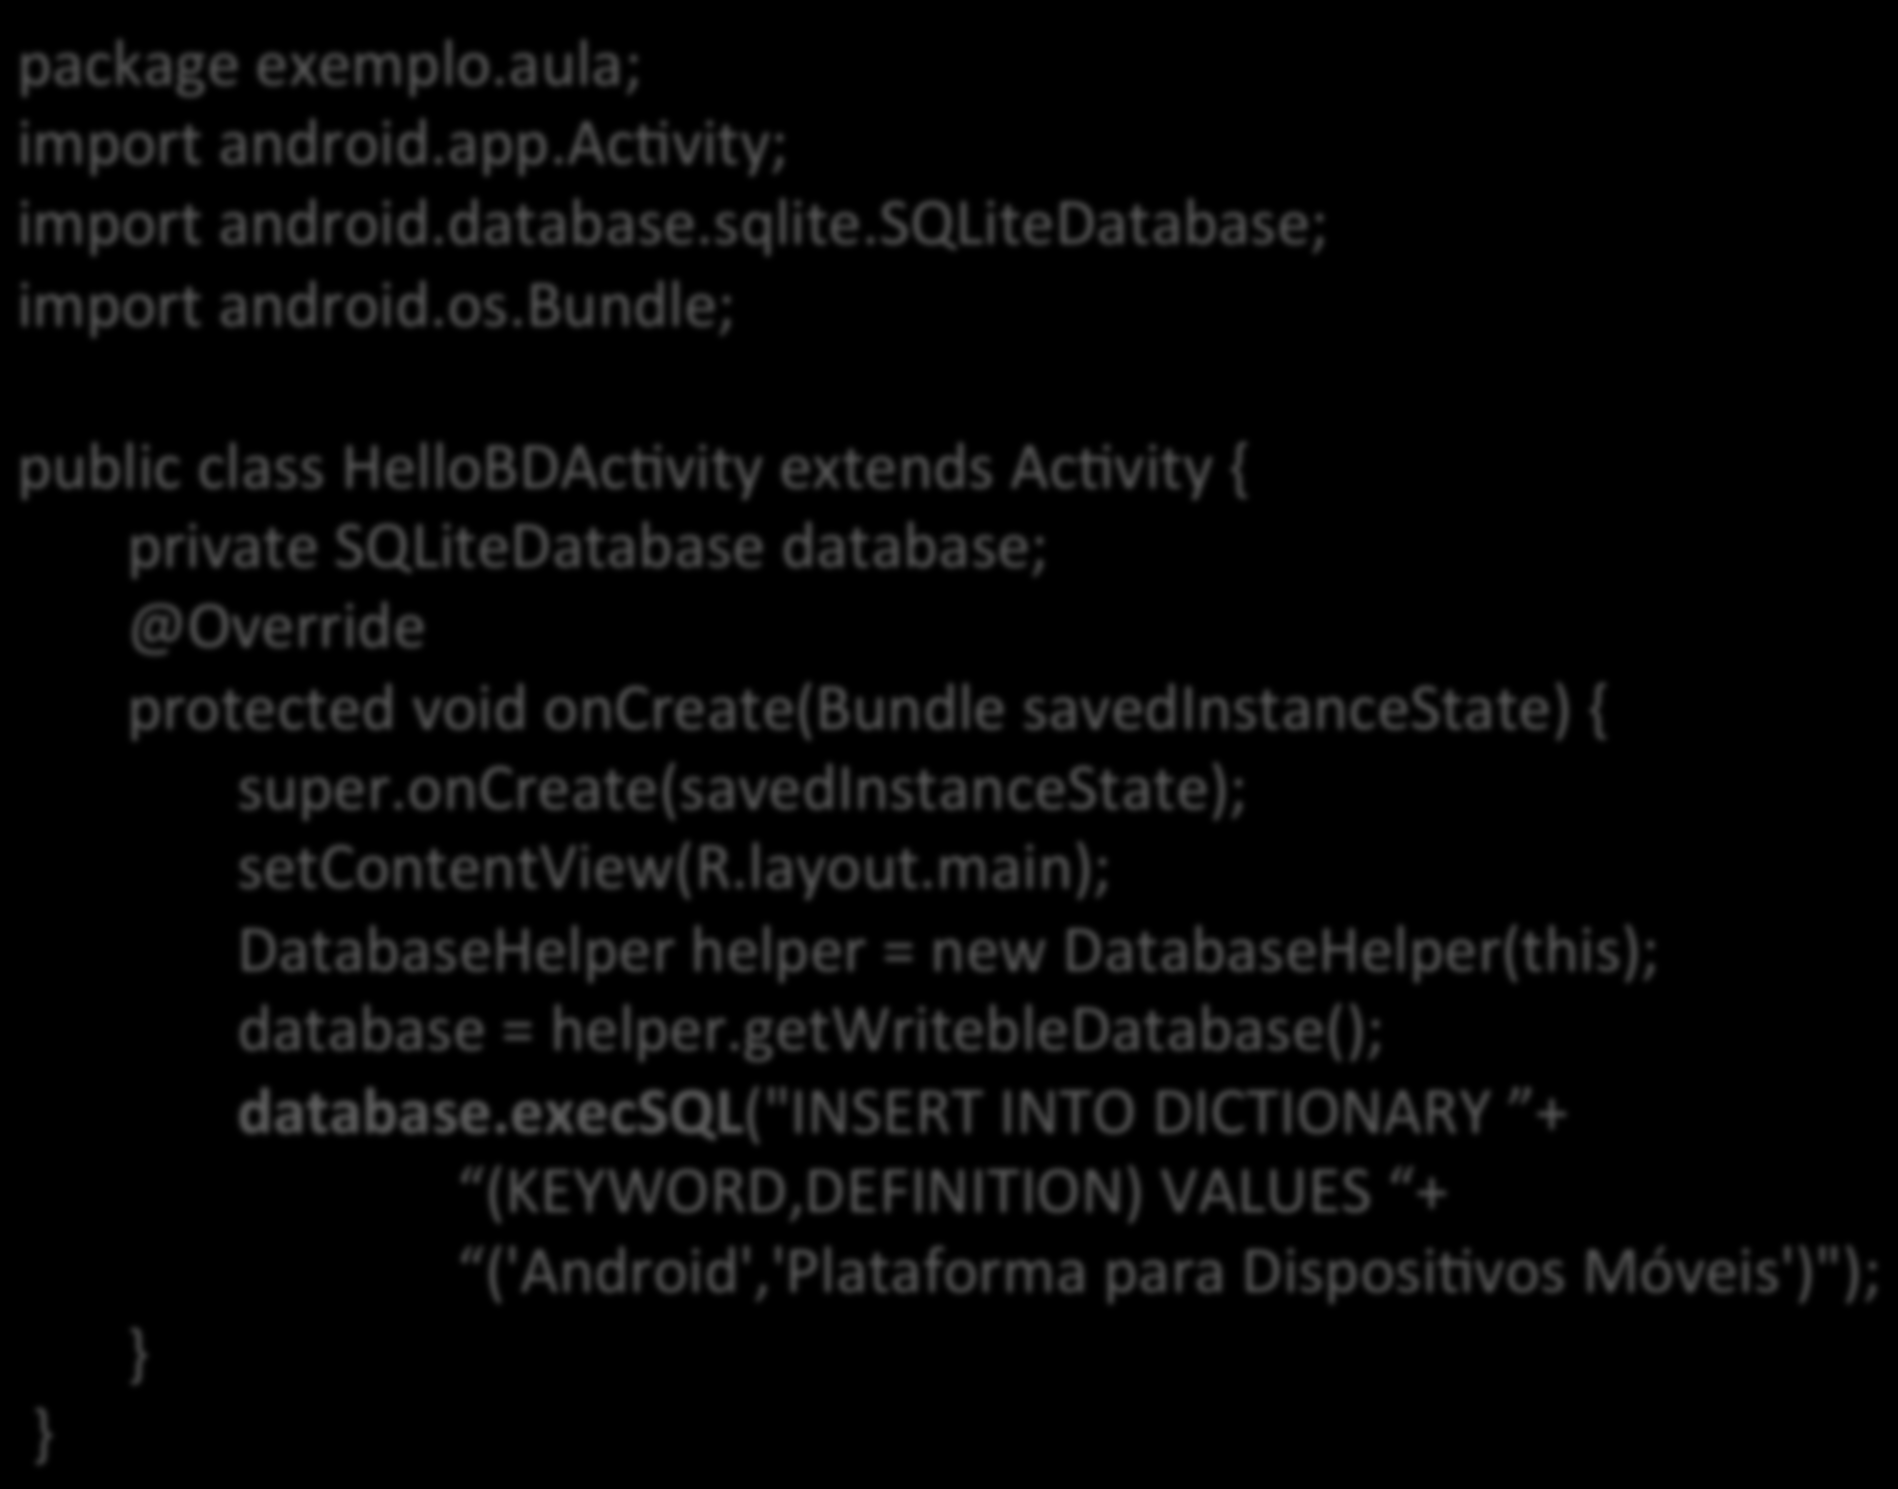 package exemplo.aula; import android.app.acavity; import android.database.sqlite.sqlitedatabase; import android.os.